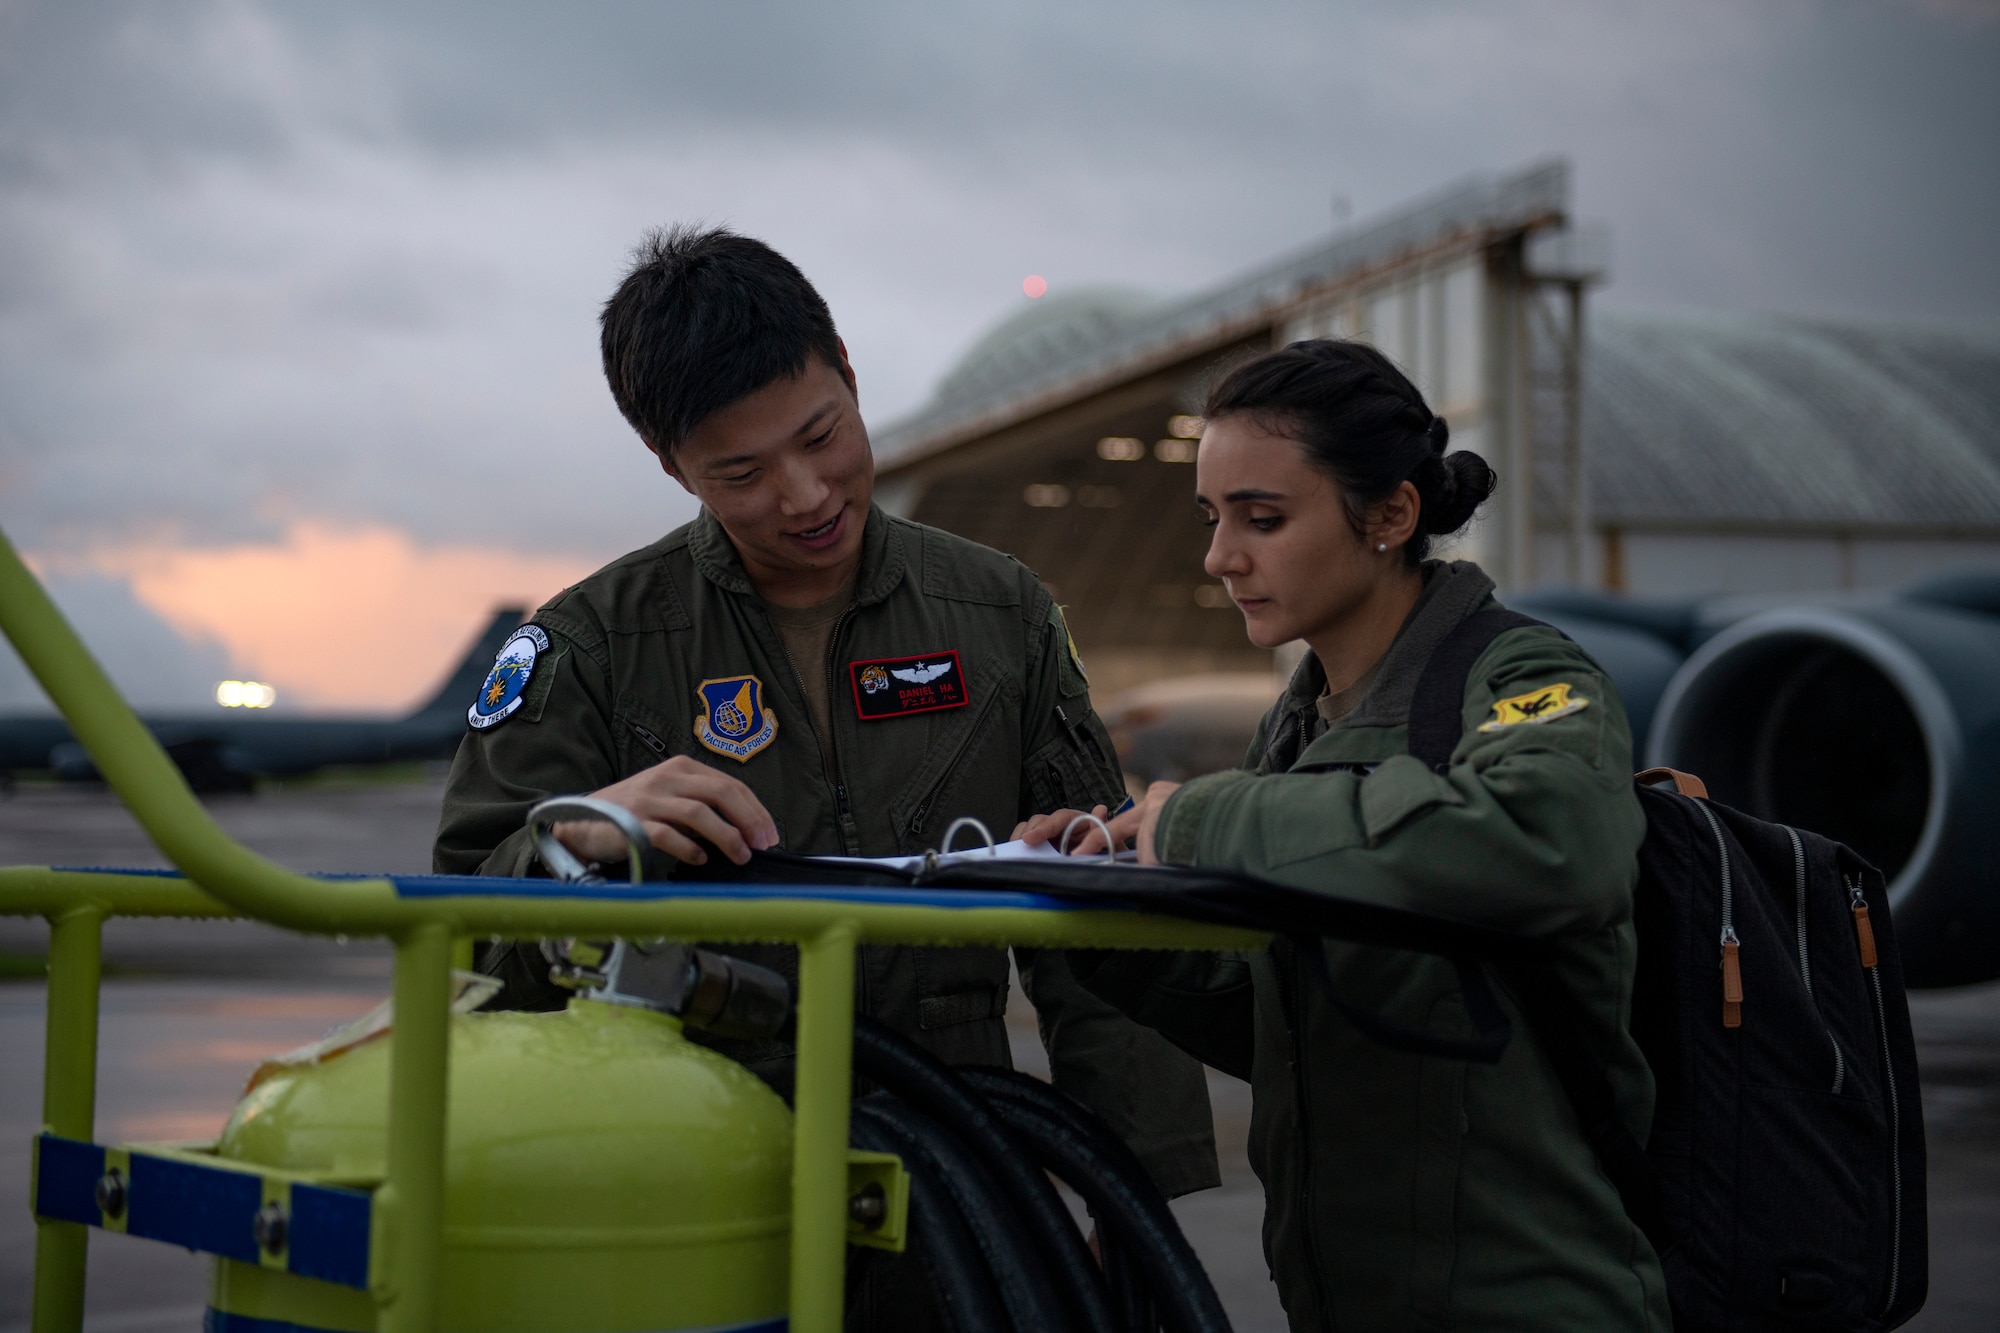 U.S. Air Force Maj. Daniel Ha and Capt. Jessica Wallander, 909th Air Refueling Squadron KC-135 Stratotanker pilots, review the flight plan prior to a refueling mission in support of Exercise Southern Beach at Kadena Air Base, Japan, Sept. 15, 2022. Exercise Southern Beach is part of a continual effort to enhance interoperability between U.S. Forces and host nations, building a partnership that can effectively operate high-end missions in defense of a free and open Indo-Pacific region. (U.S. Air Force photo by Senior Airman Jessi Roth)